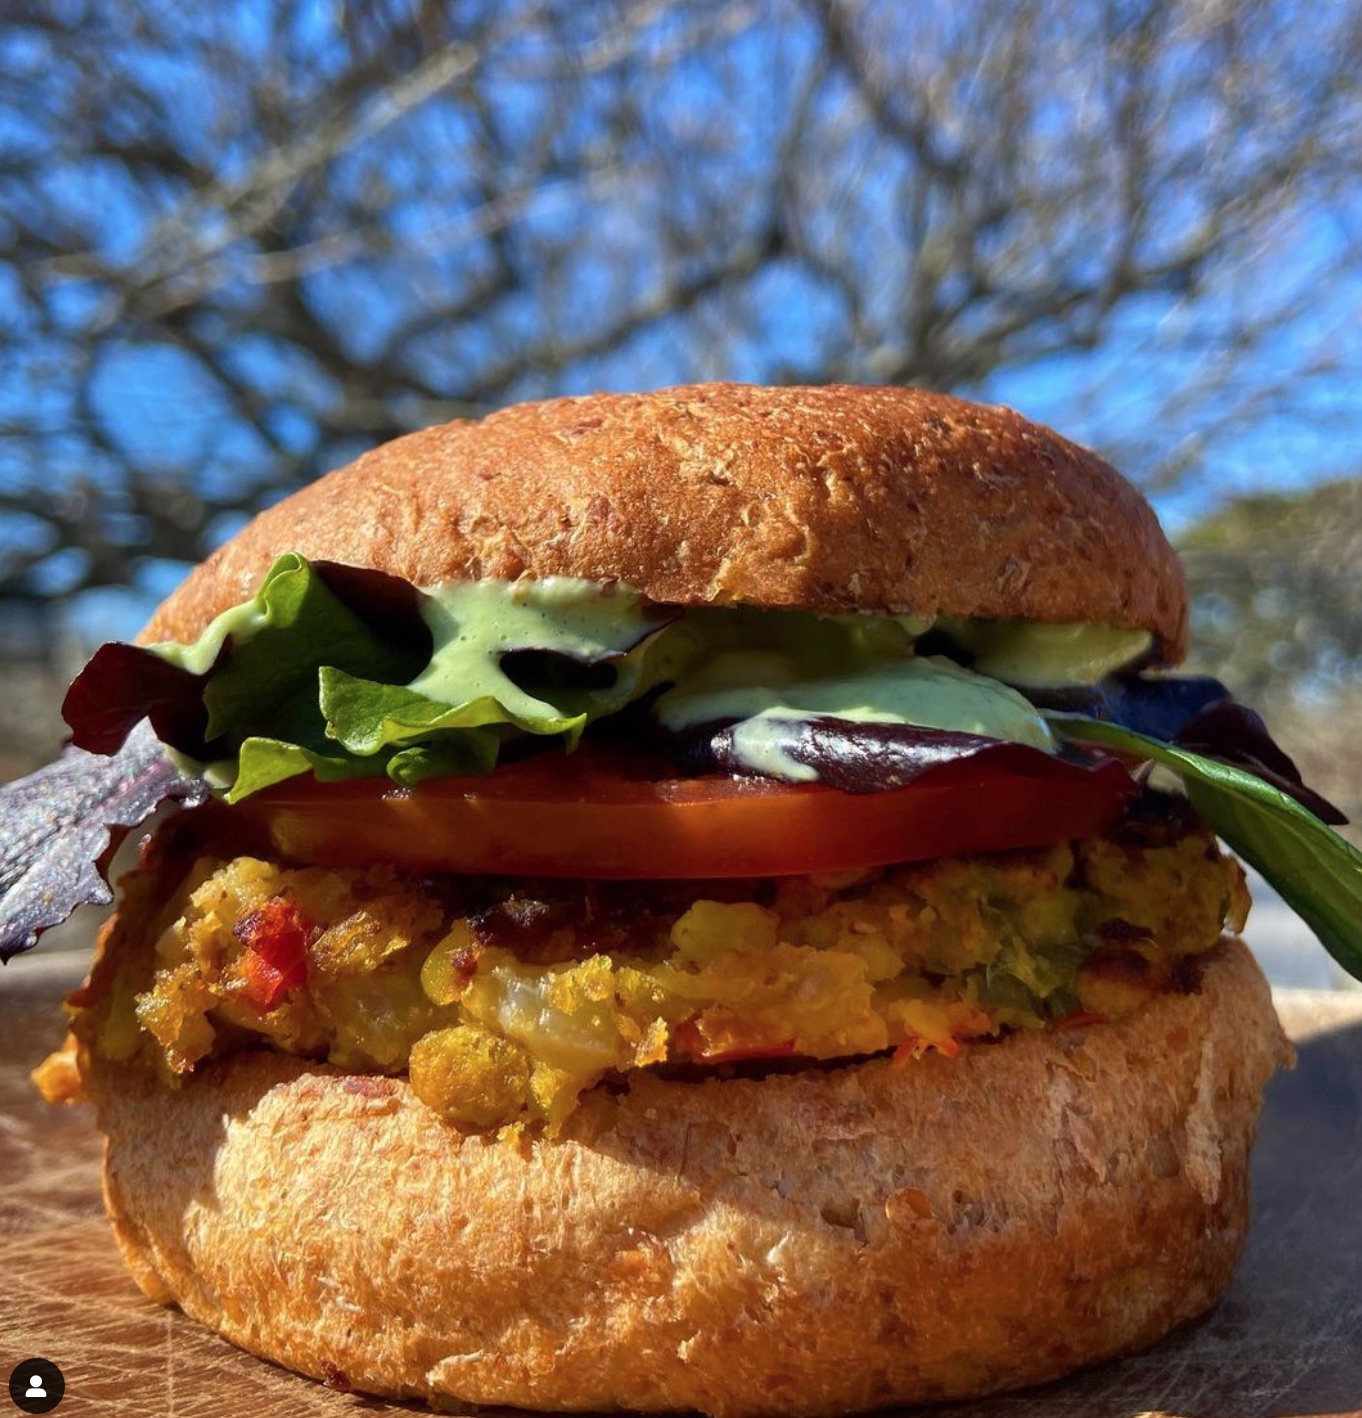 A lentil burger at Naturally Good Foods + Cafe in Montauk